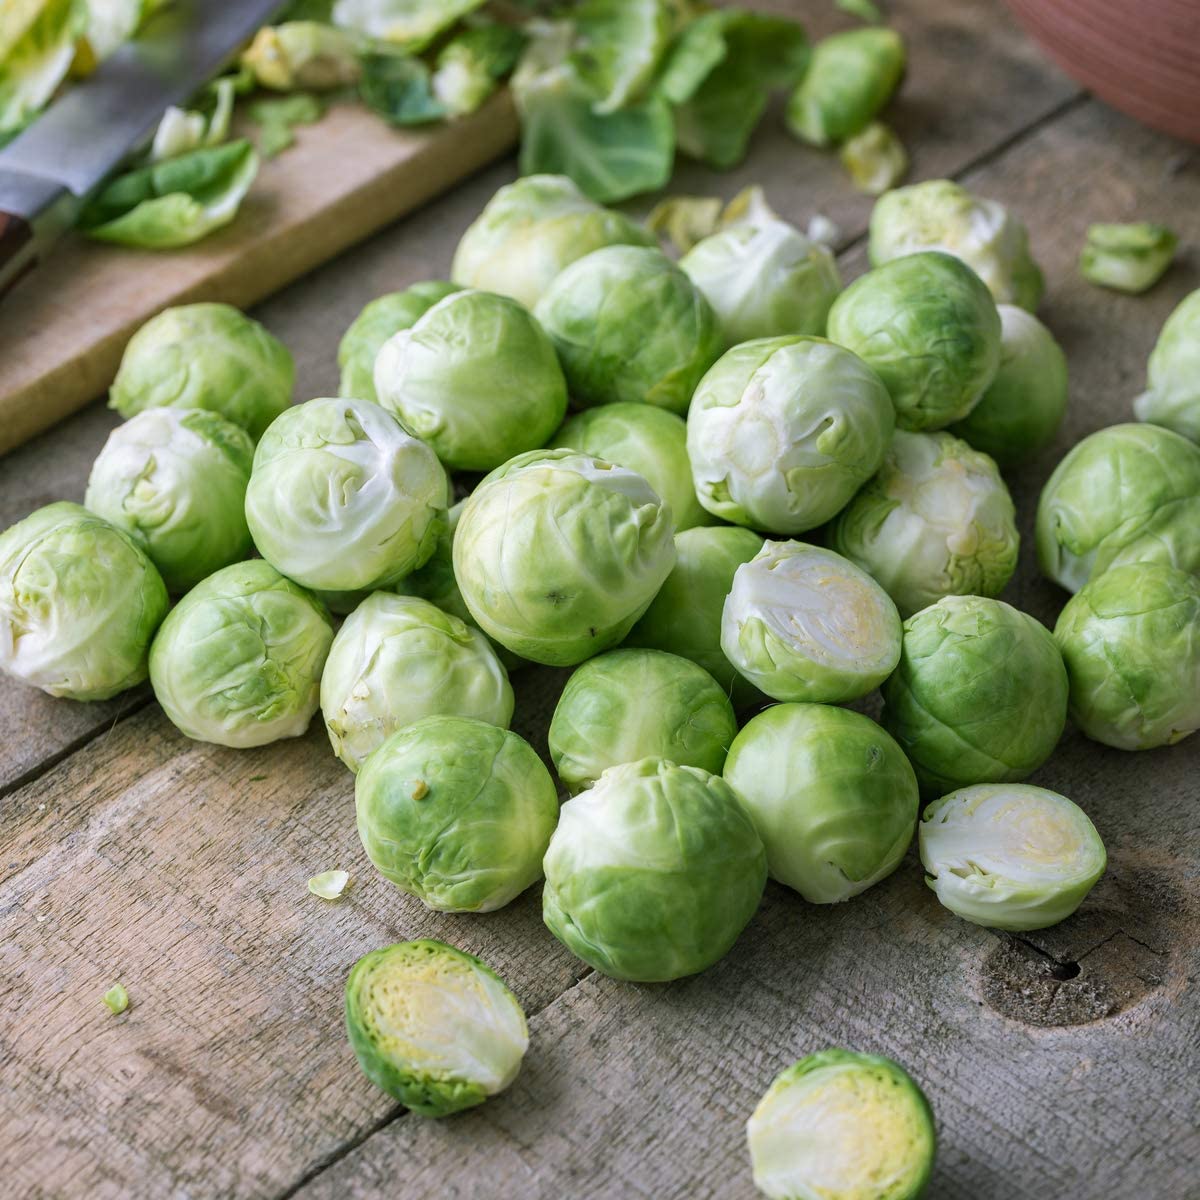 Brussels Sprouts 'Churchill' - 12 x Seed Pack - AcquaGarden